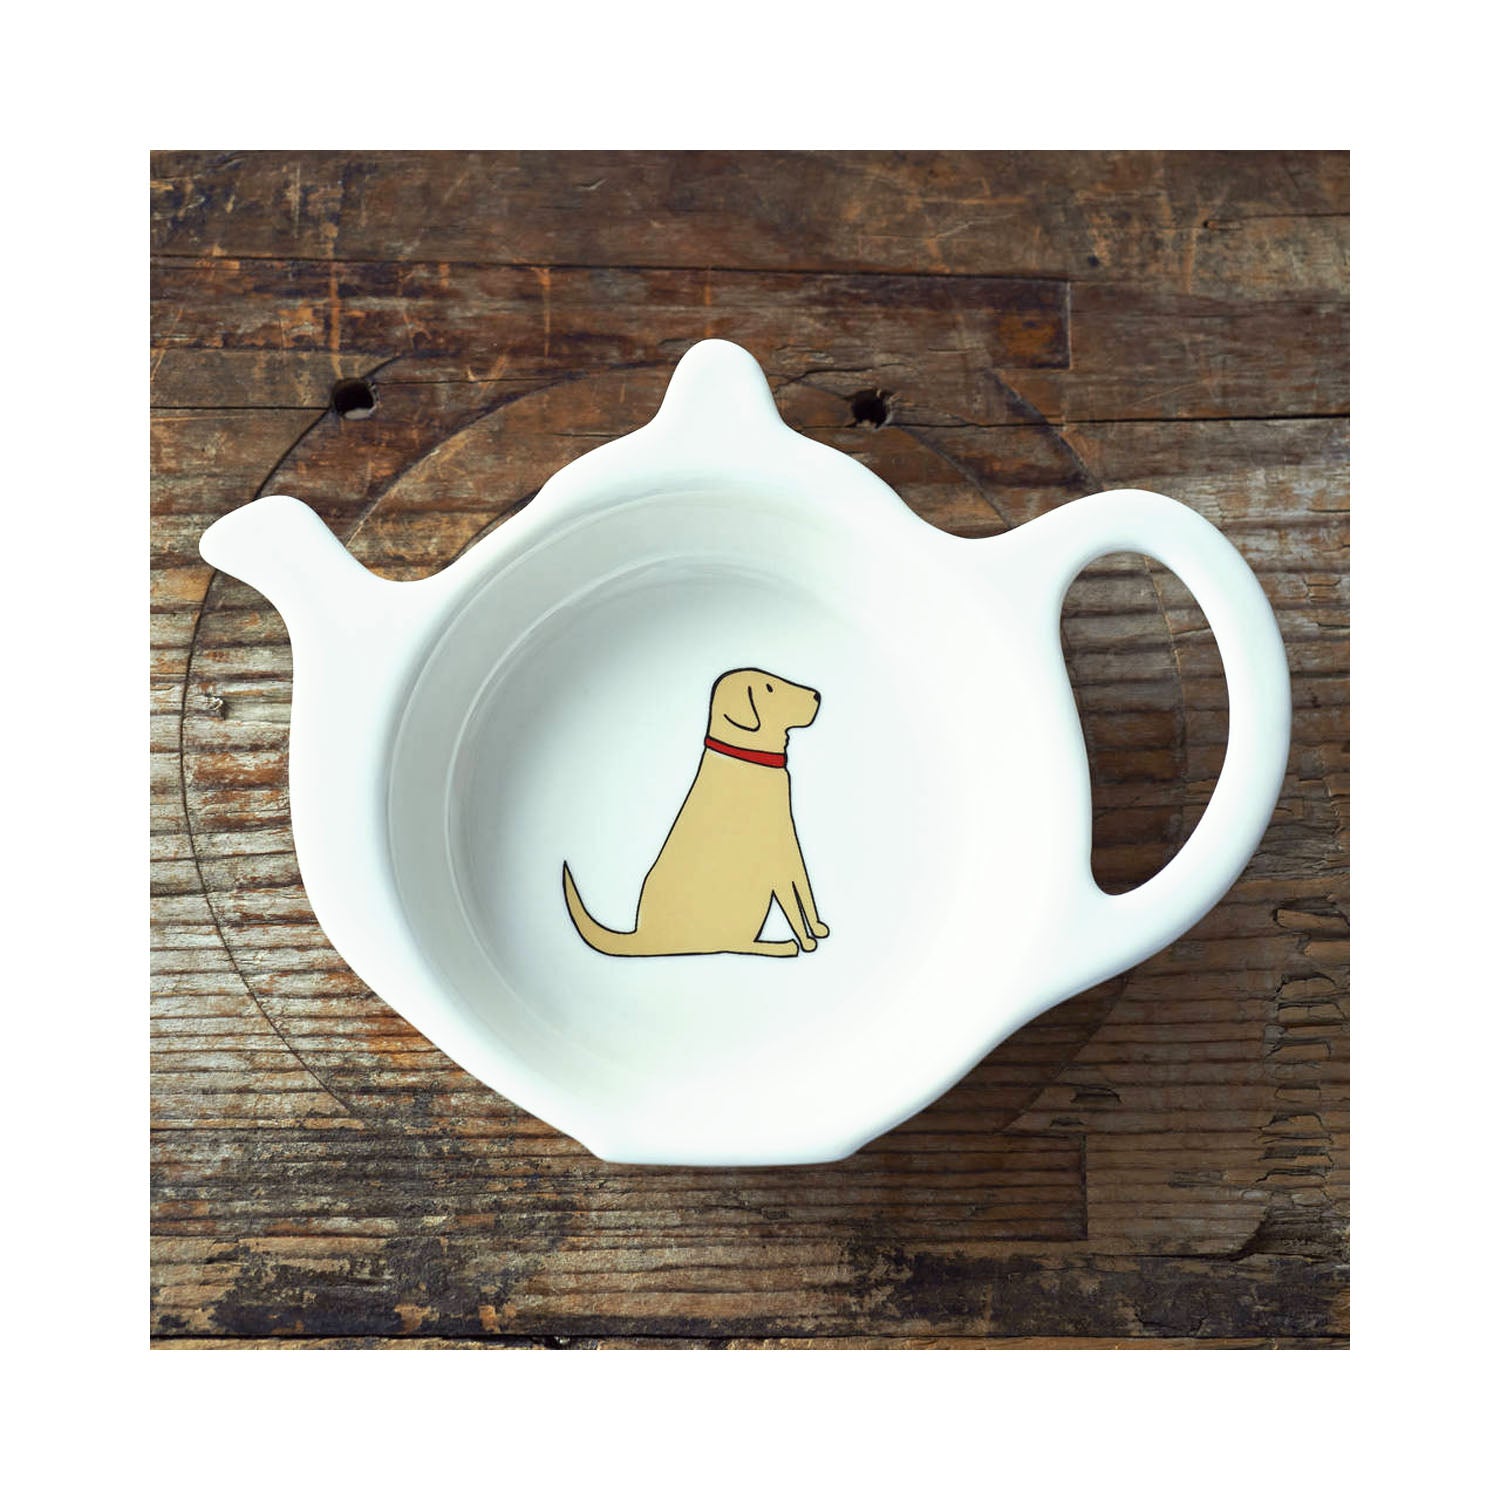 Dog Lover Gifts available at Dog Krazy Gifts - Daisy The Yellow Labrador Teabag Dish - part of the Sweet William range available from Dog Krazy Gifts